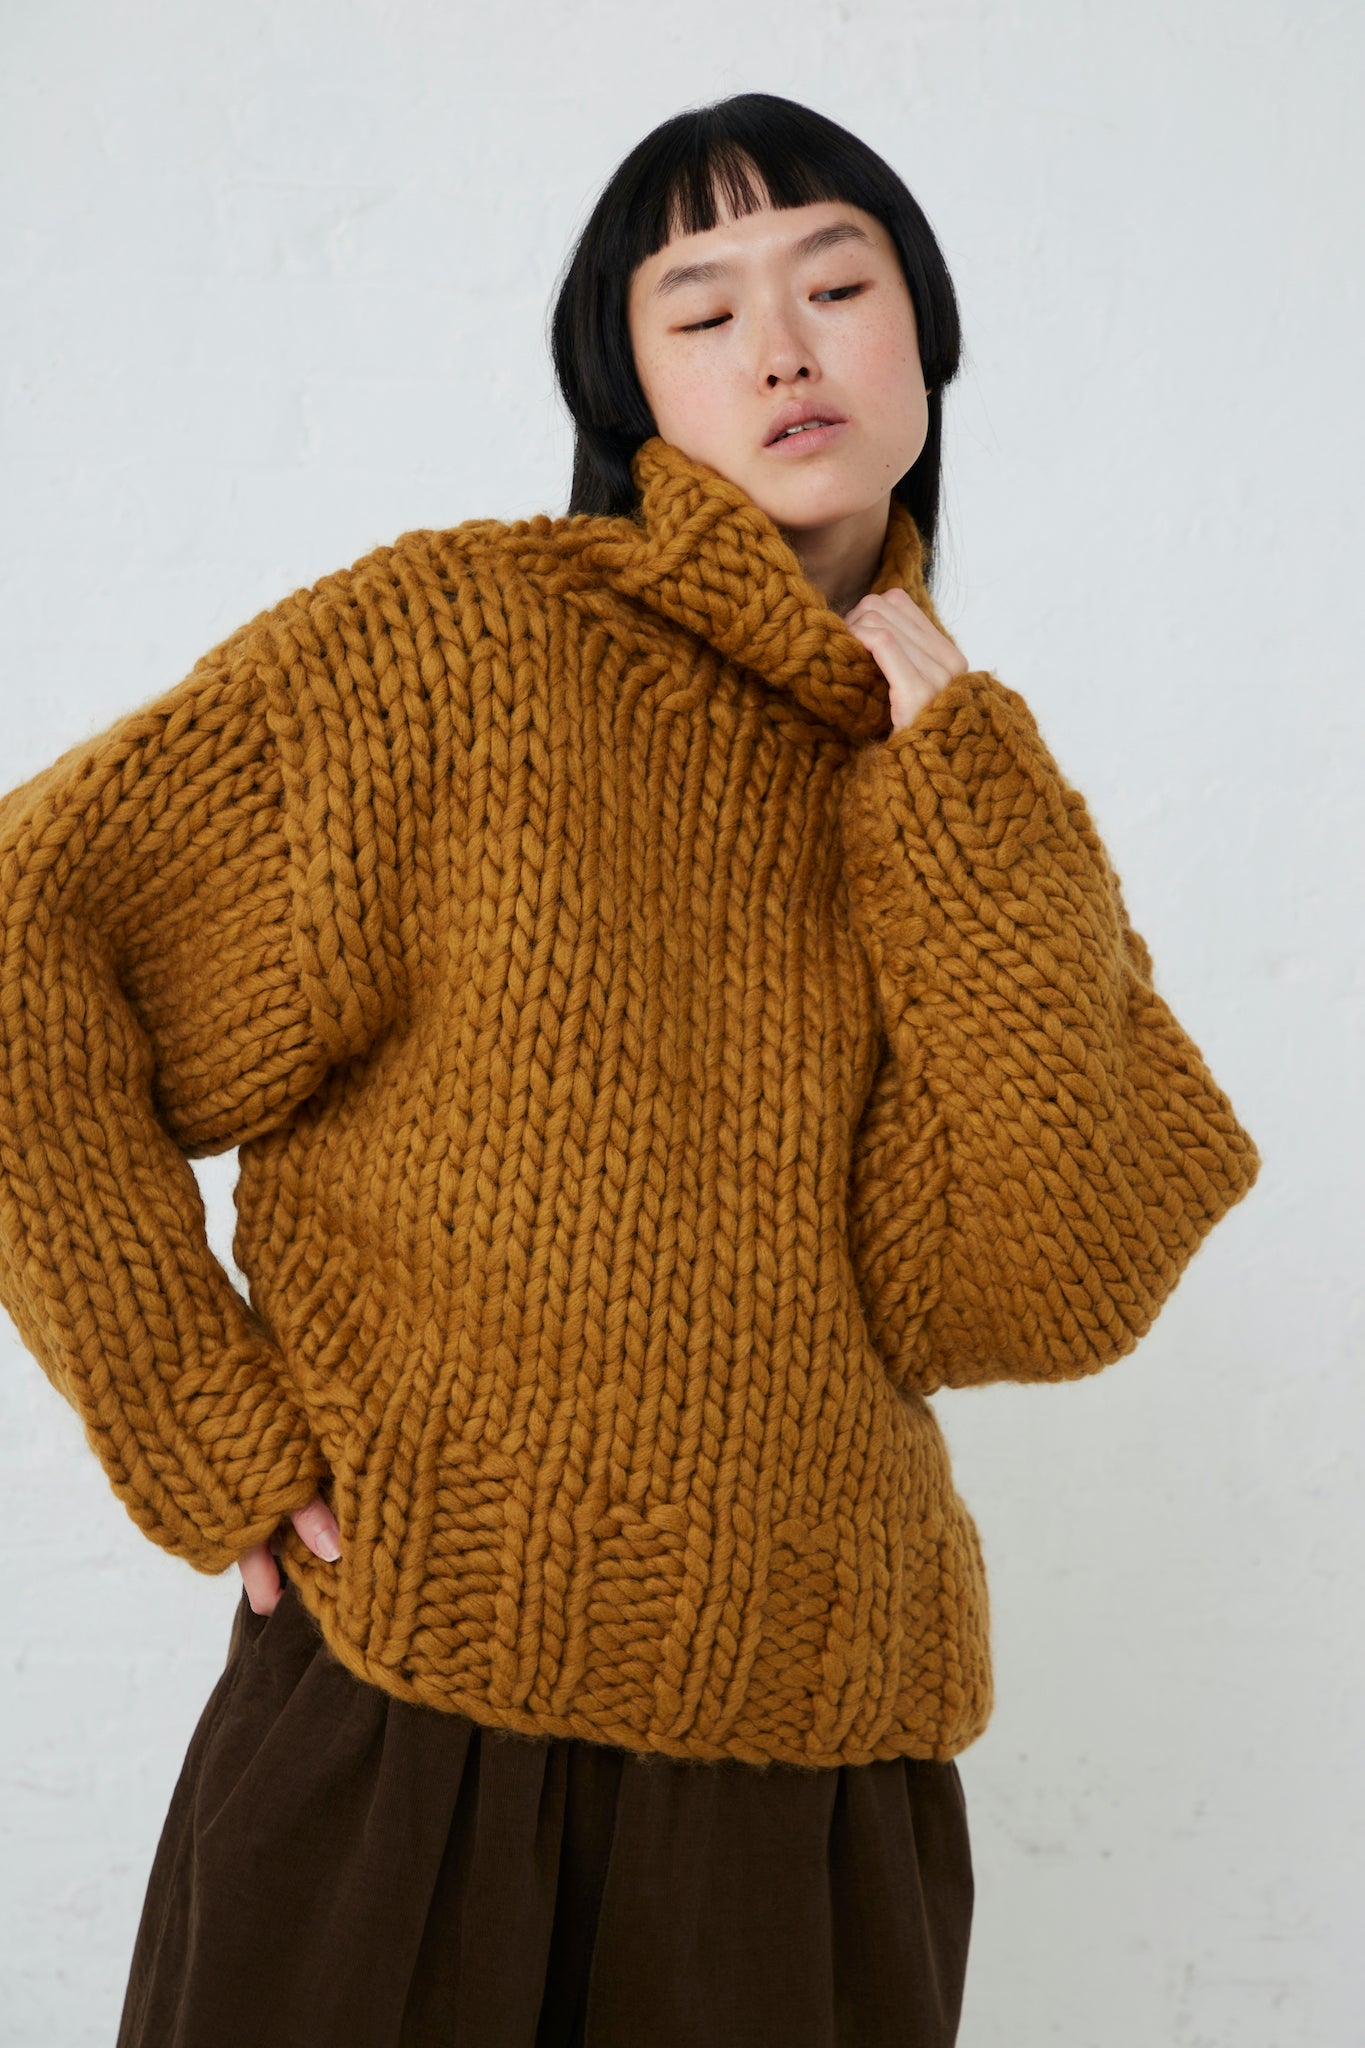 The model is wearing an Ichi Wool Hand-Knit Pullover in Mustard. Available at Oroboro Store.